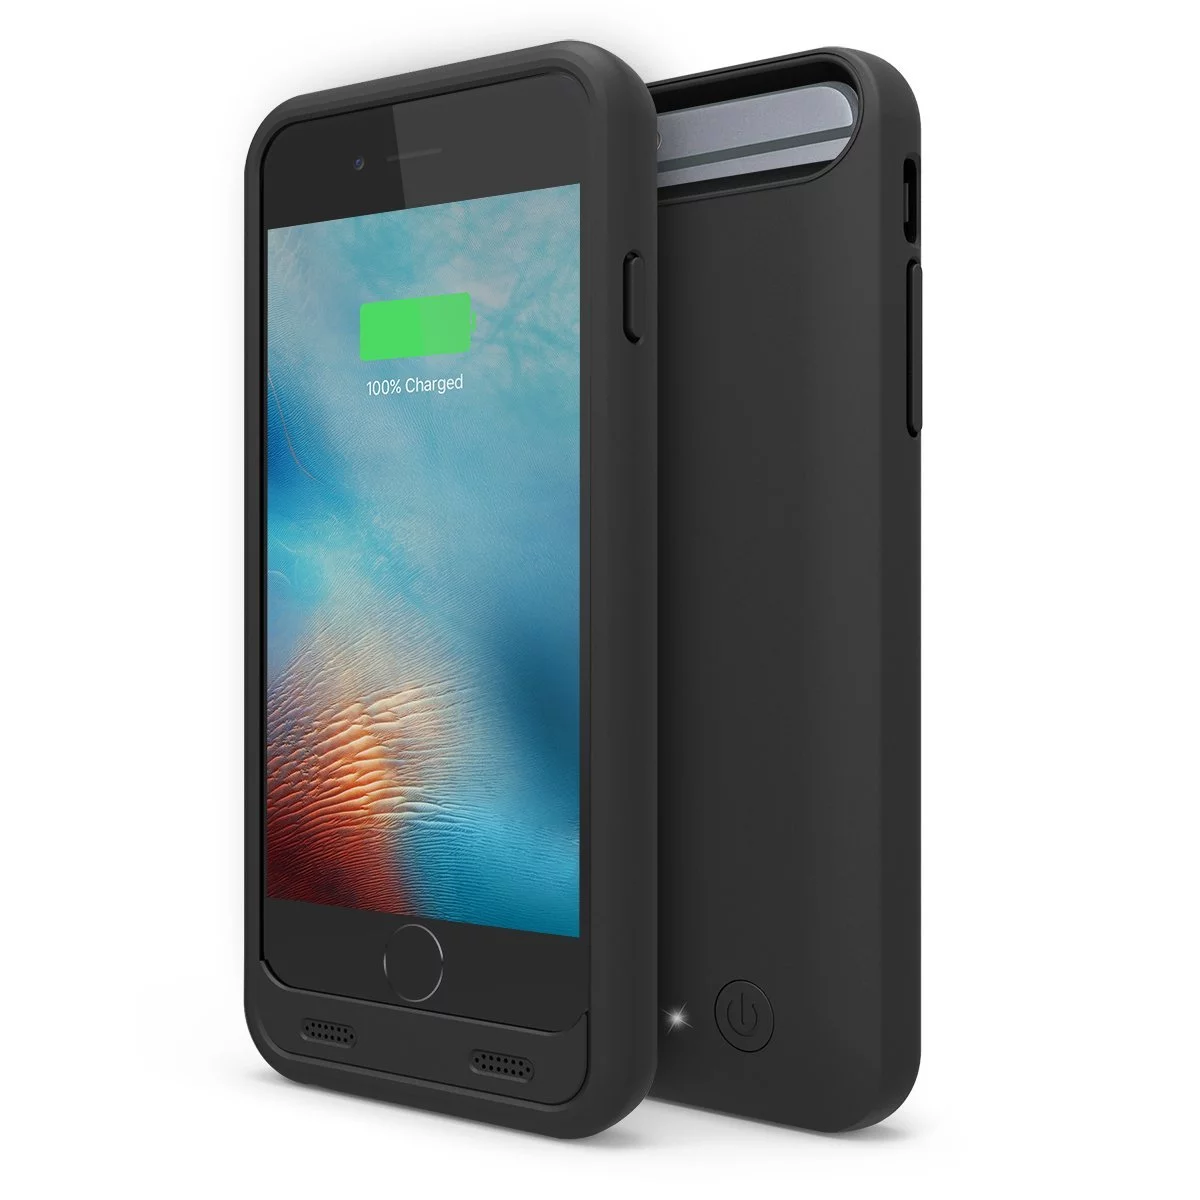 1byone iPhone 6 battery case